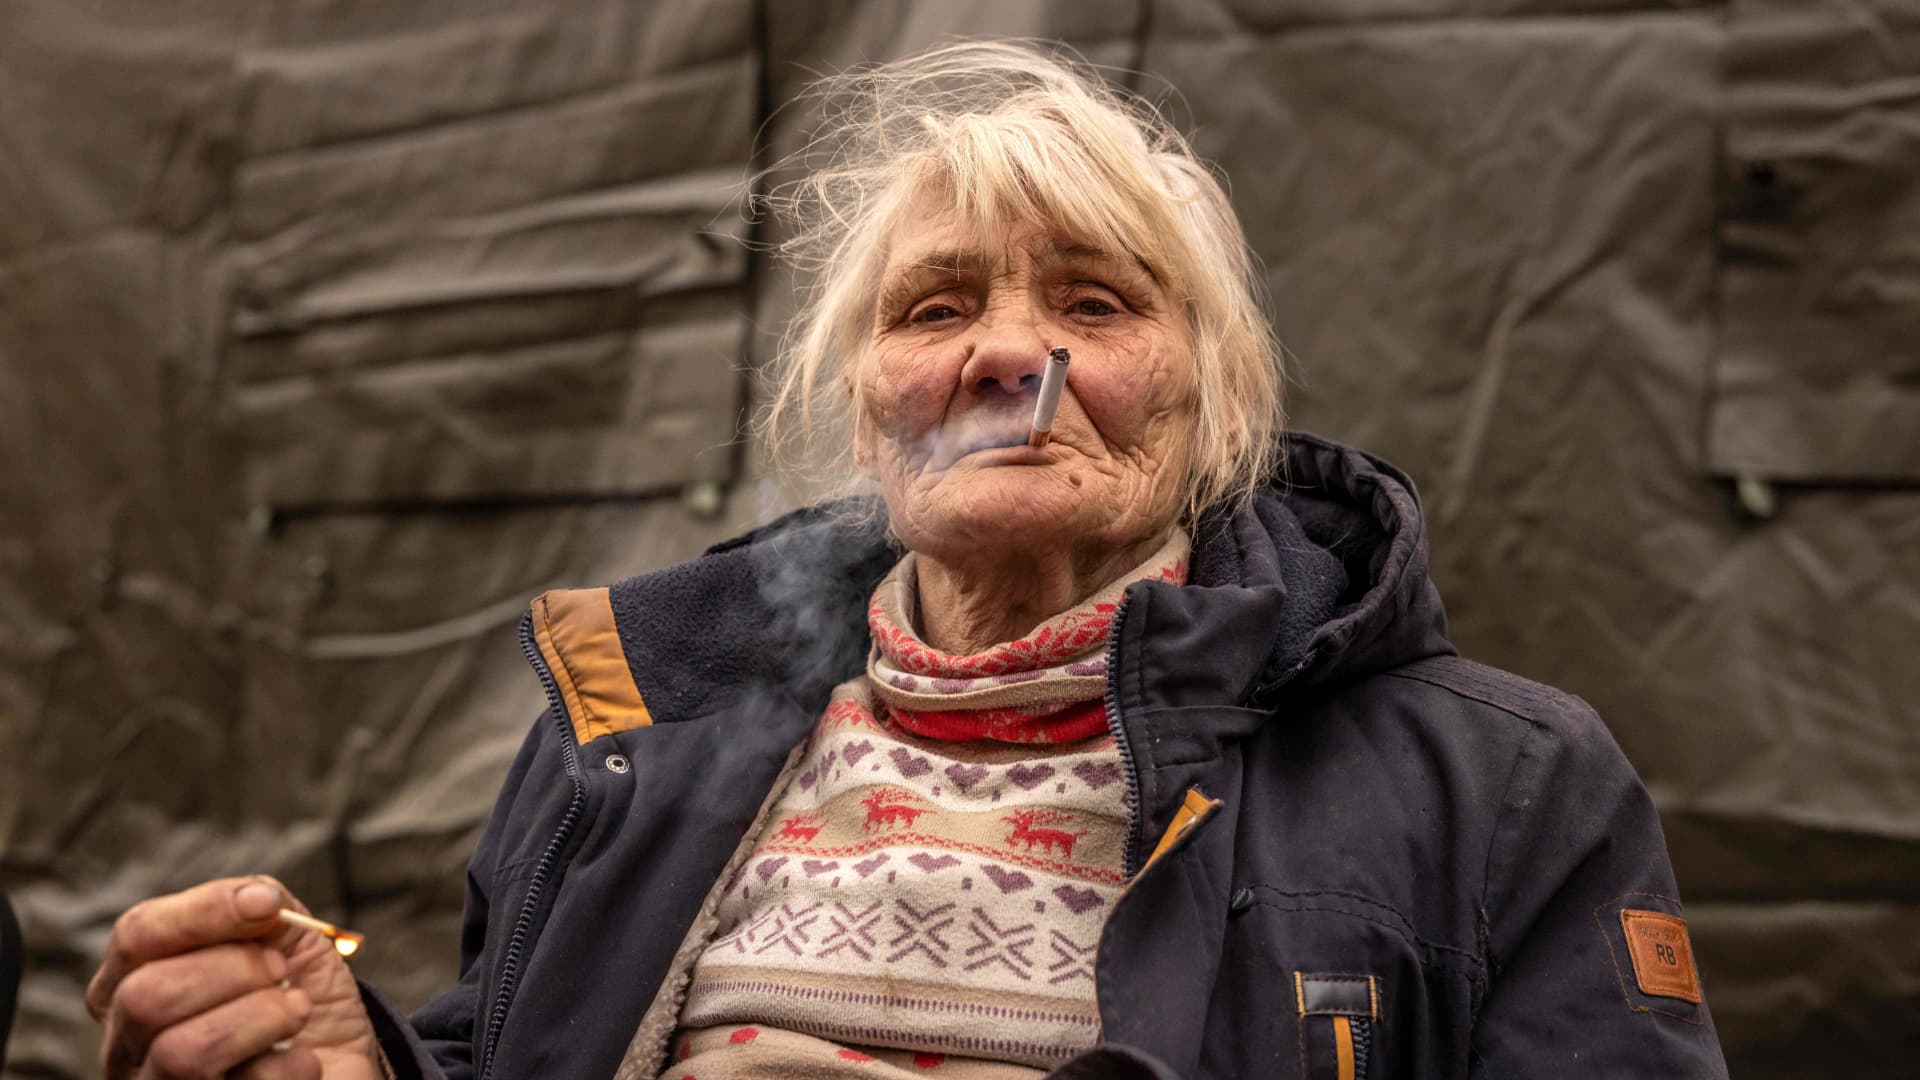 A woman smokes a cigarette after fleeing her home in the suburbs of Kyiv, on March 26, 2022, during Russia's military invasion launched on Ukraine.